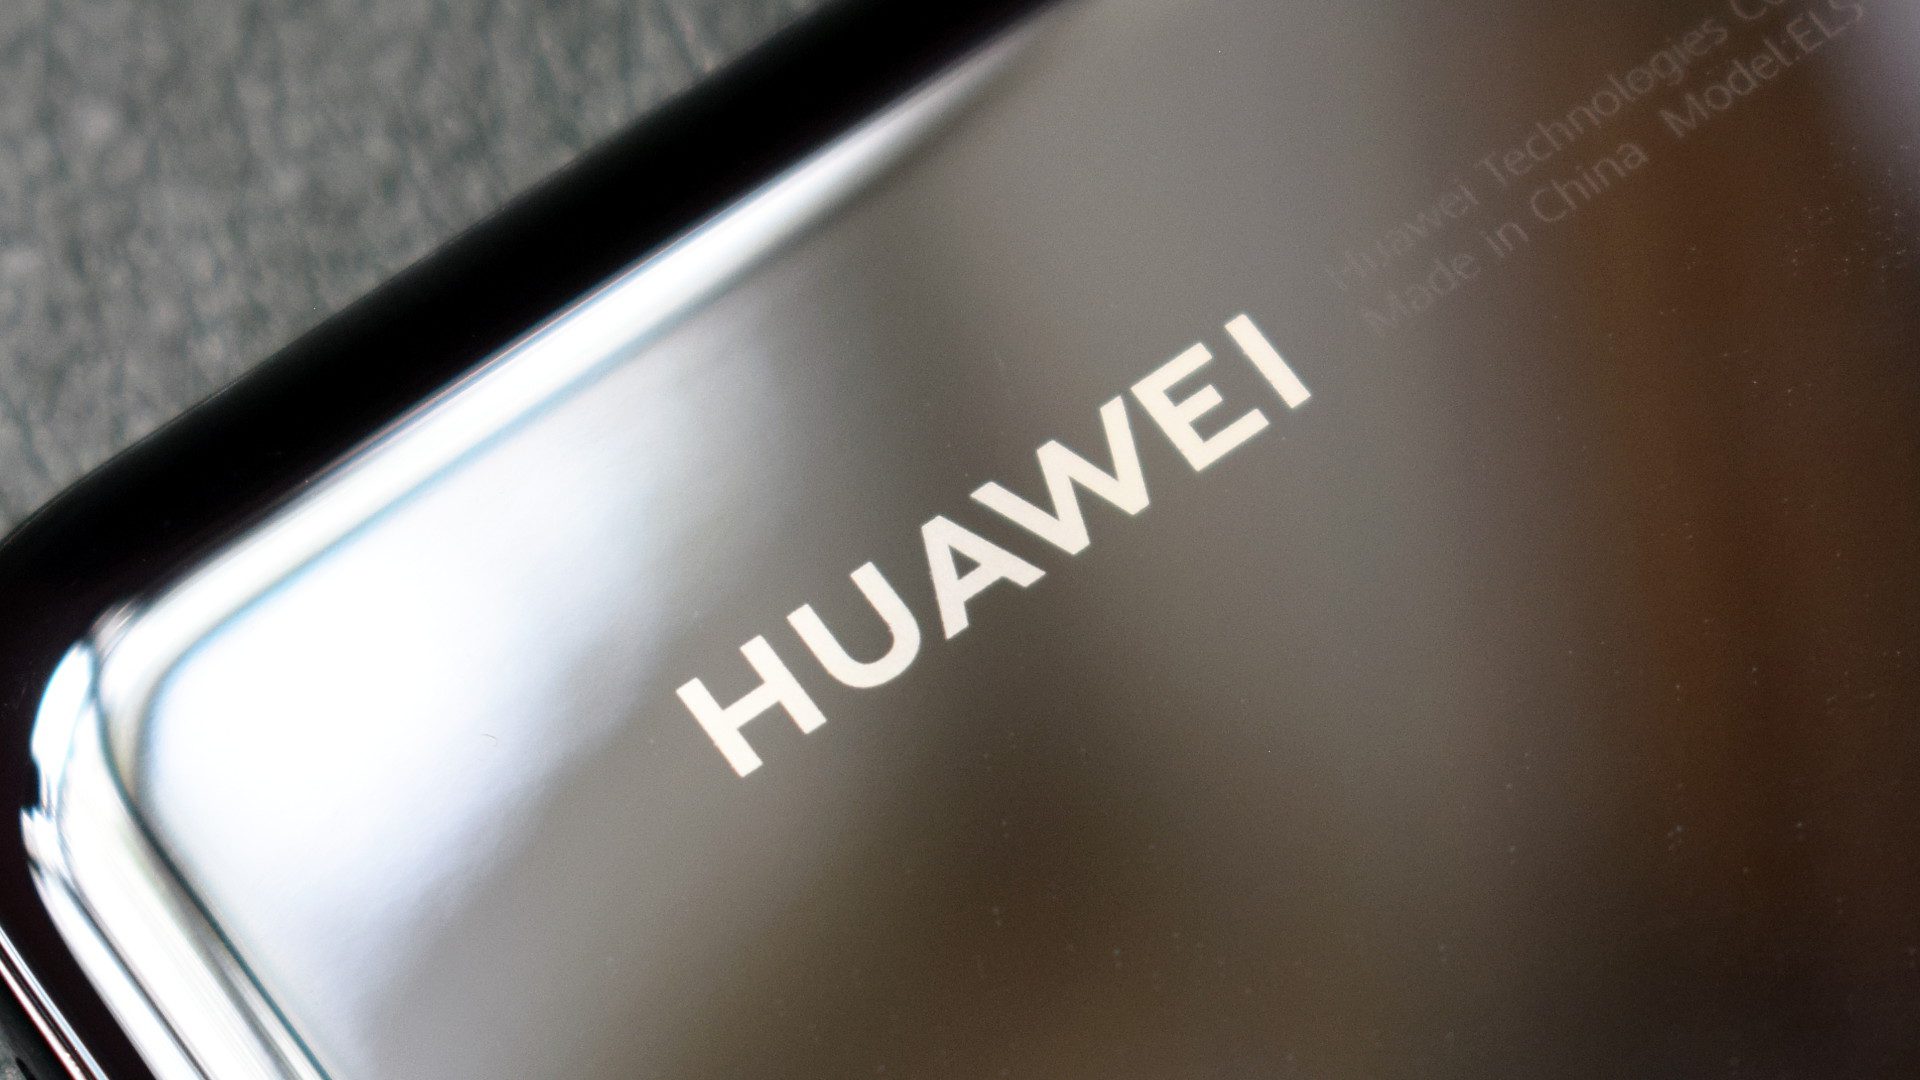 U.S. Revokes Licenses for Shipments to Huawei, Impacting Chip Supplies